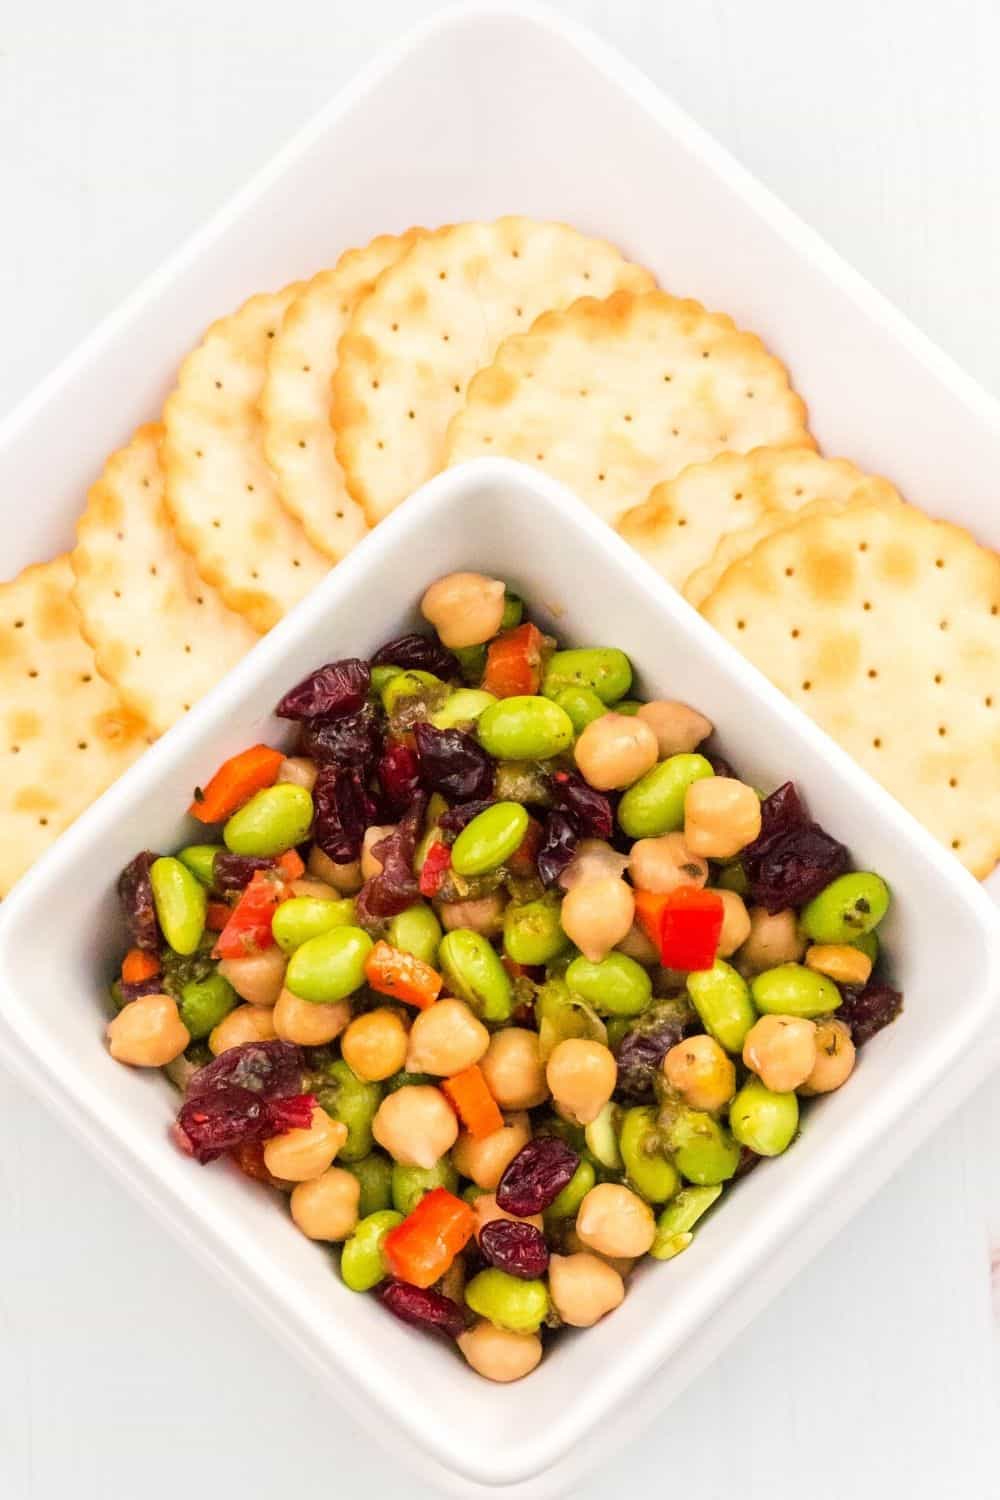 a small white bowl of chickpea salad served on a white plate with several crackers for dipping